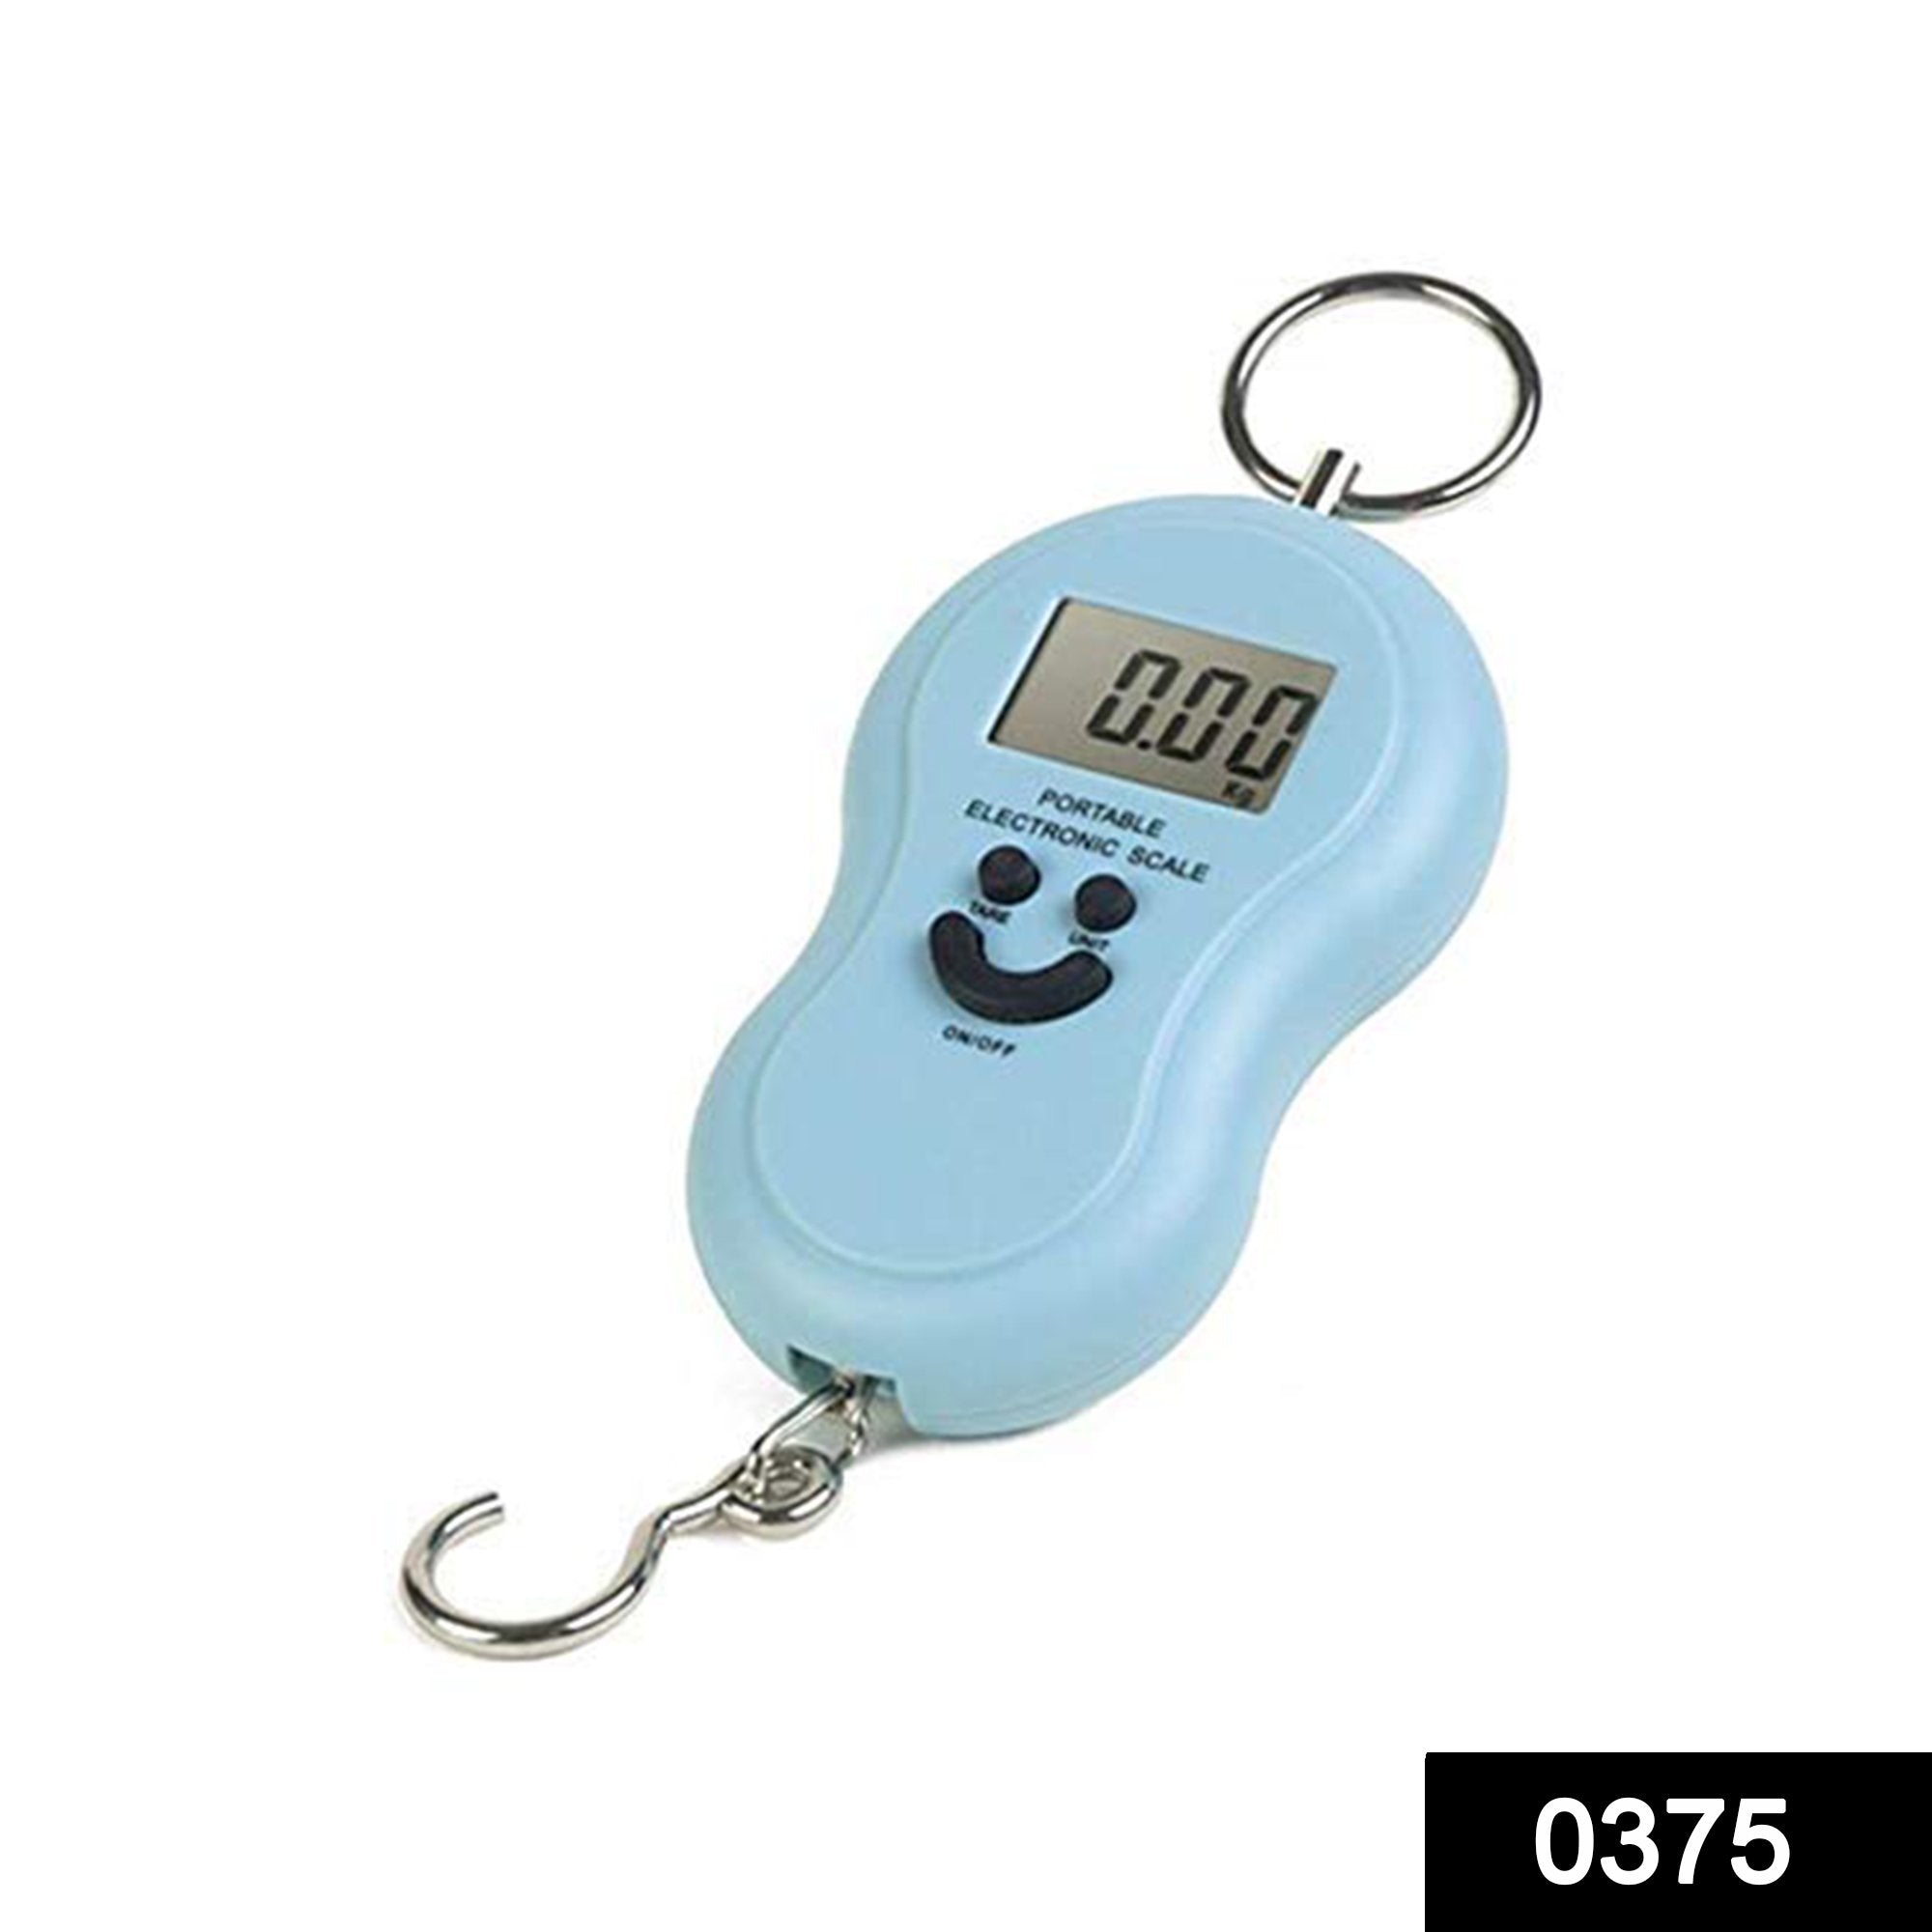 bsitfow 40kg 10g portable handy pocket smile mini electronic digital lcd scale hanging fishing hook luggage balance weight weighing scales color may vary